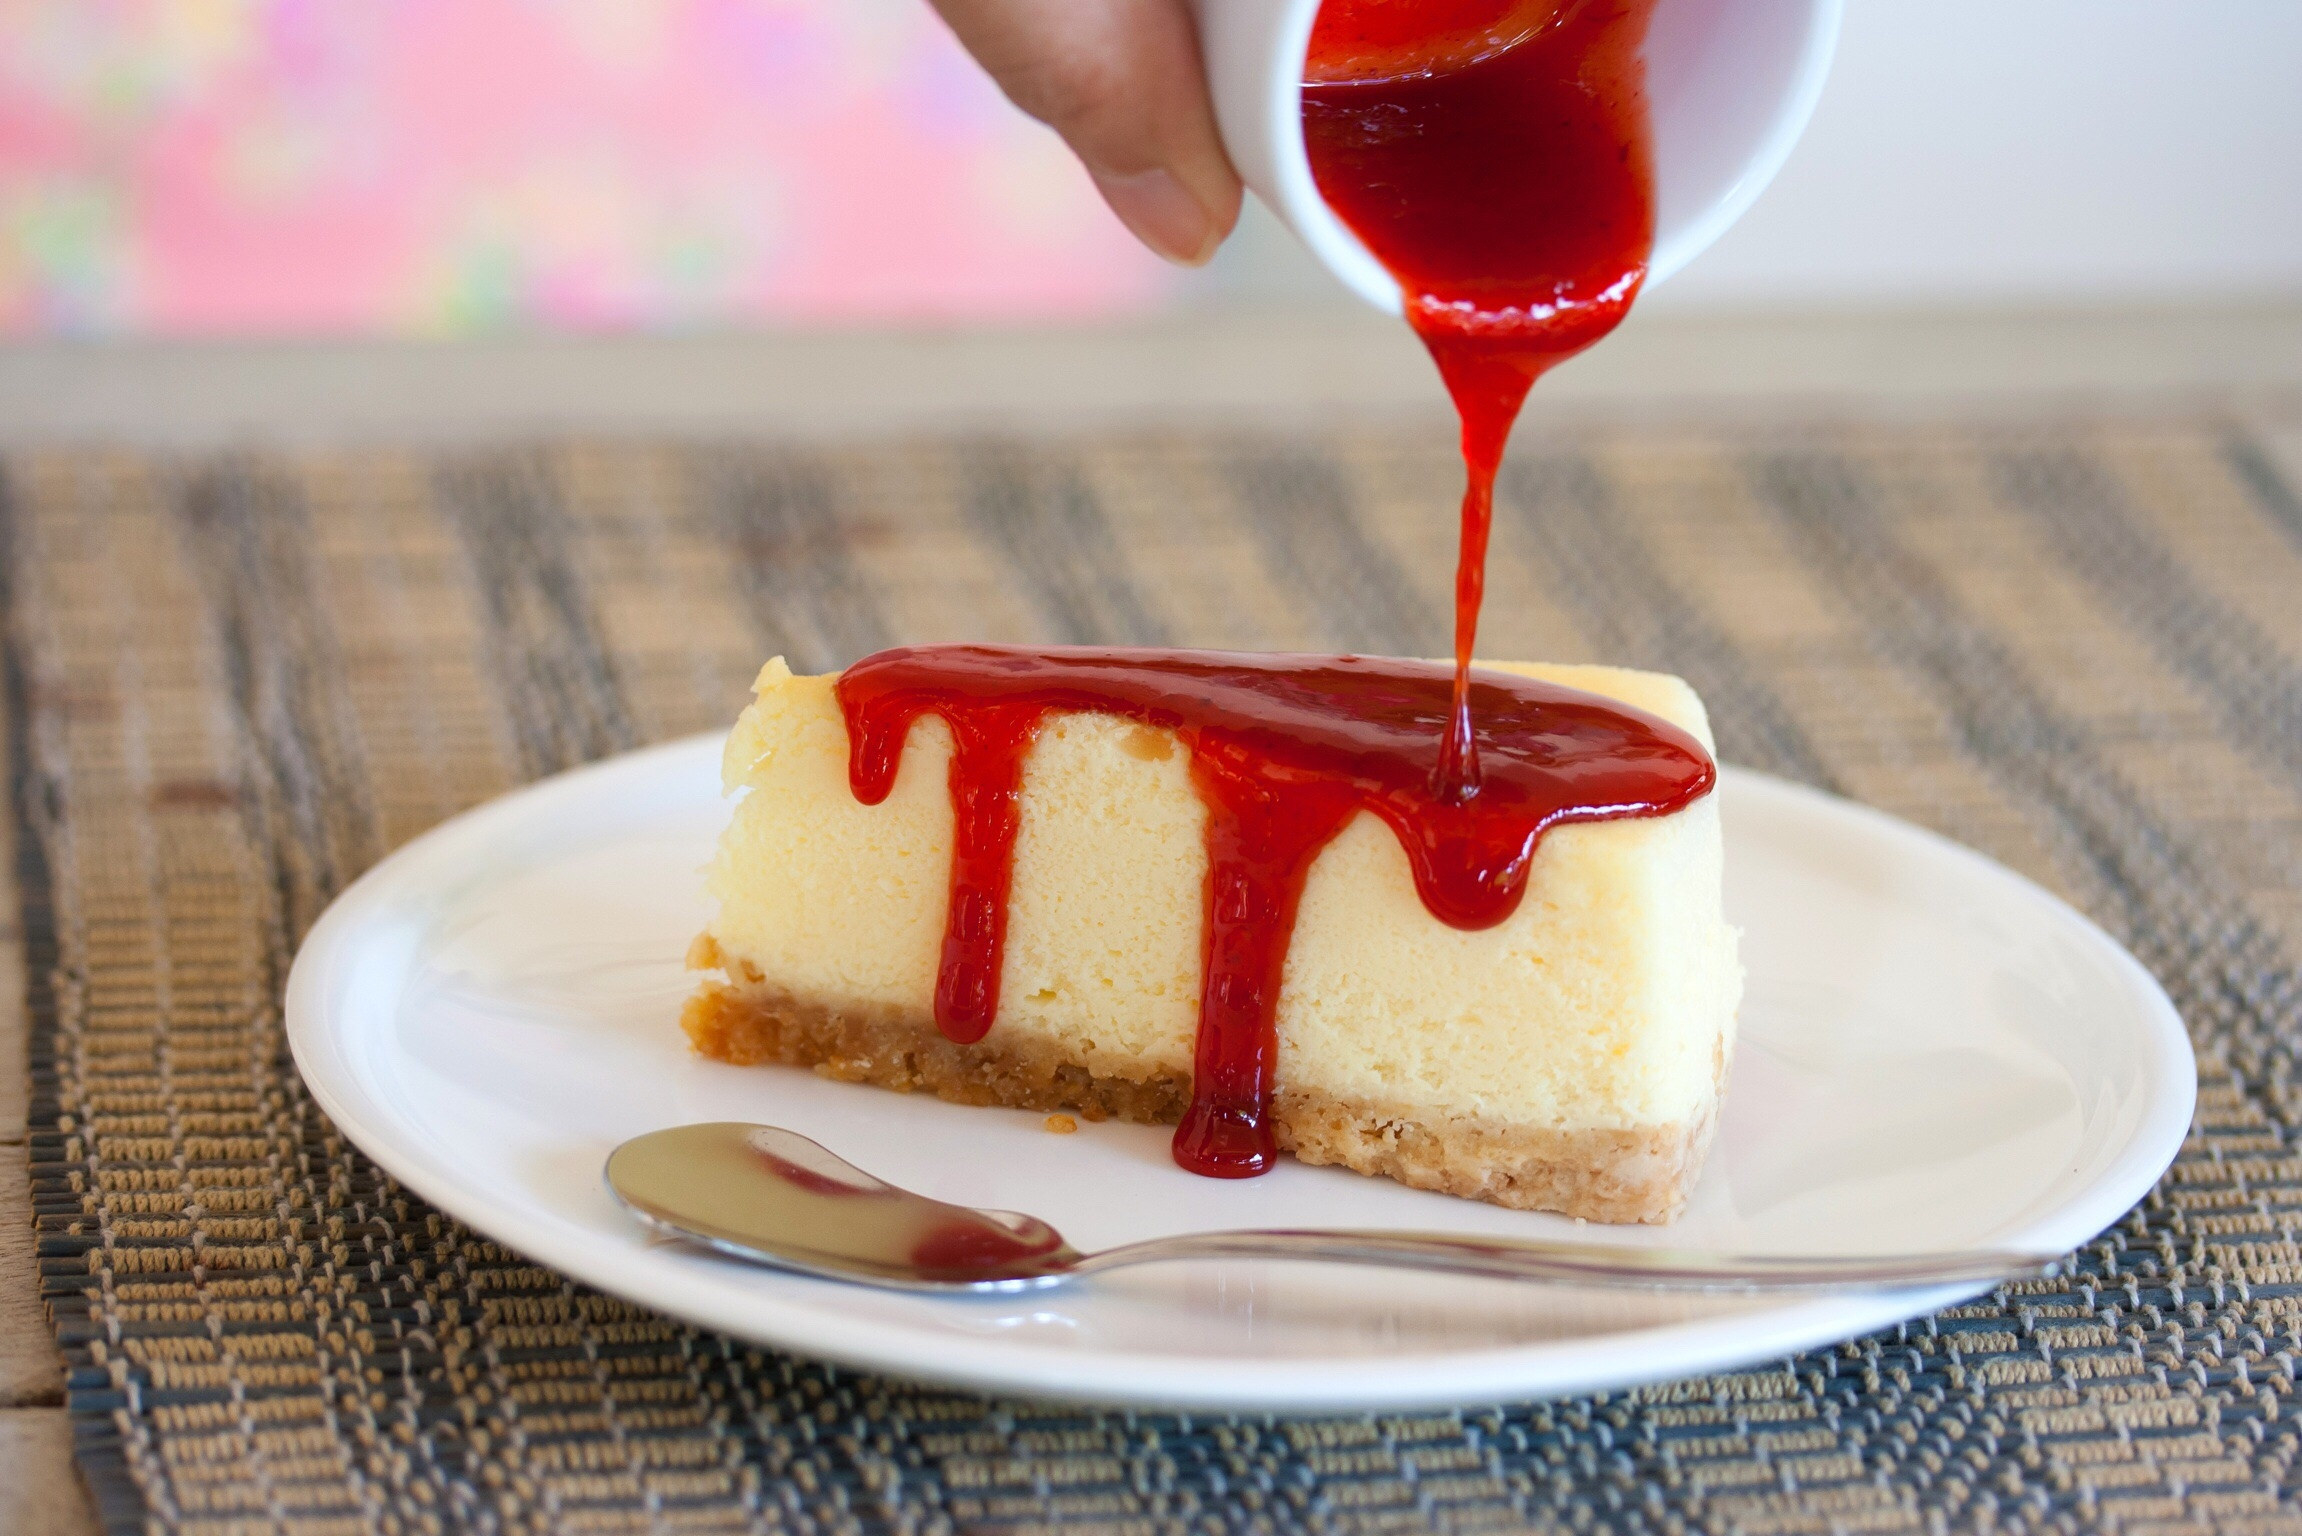 Pouring fruit syrup over a slice of cheesecake.